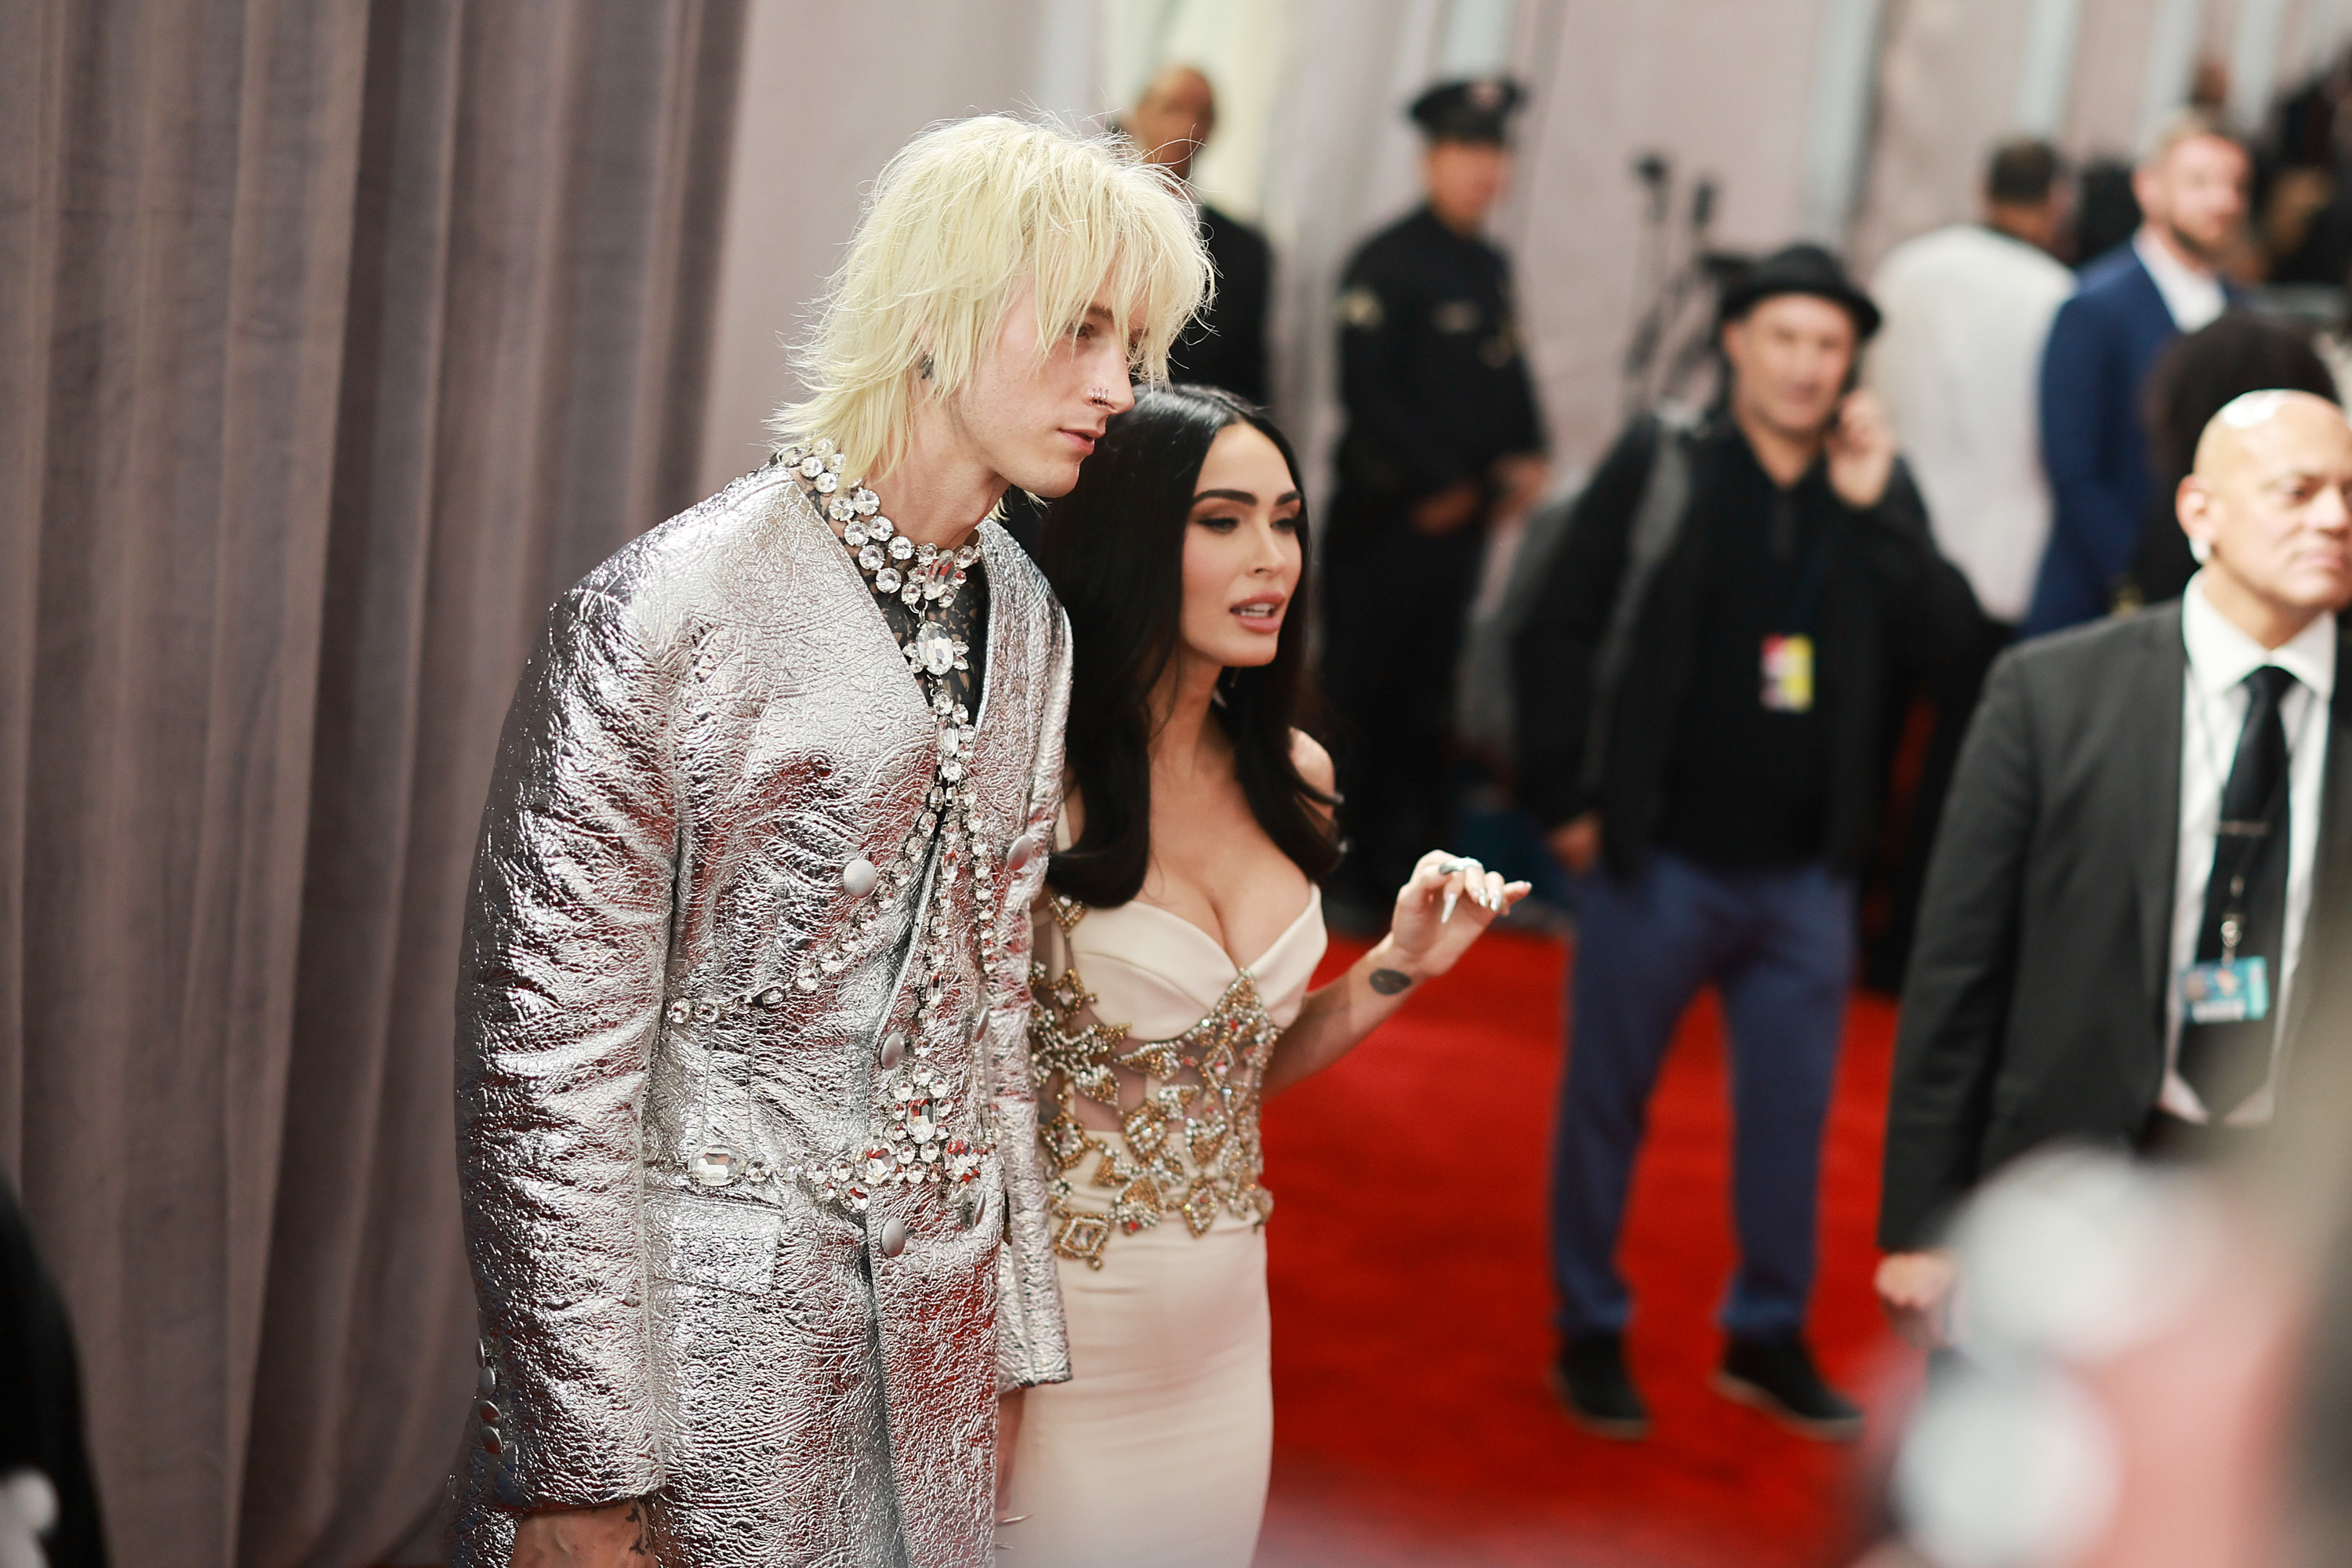 MGK and Megan on the red carpet